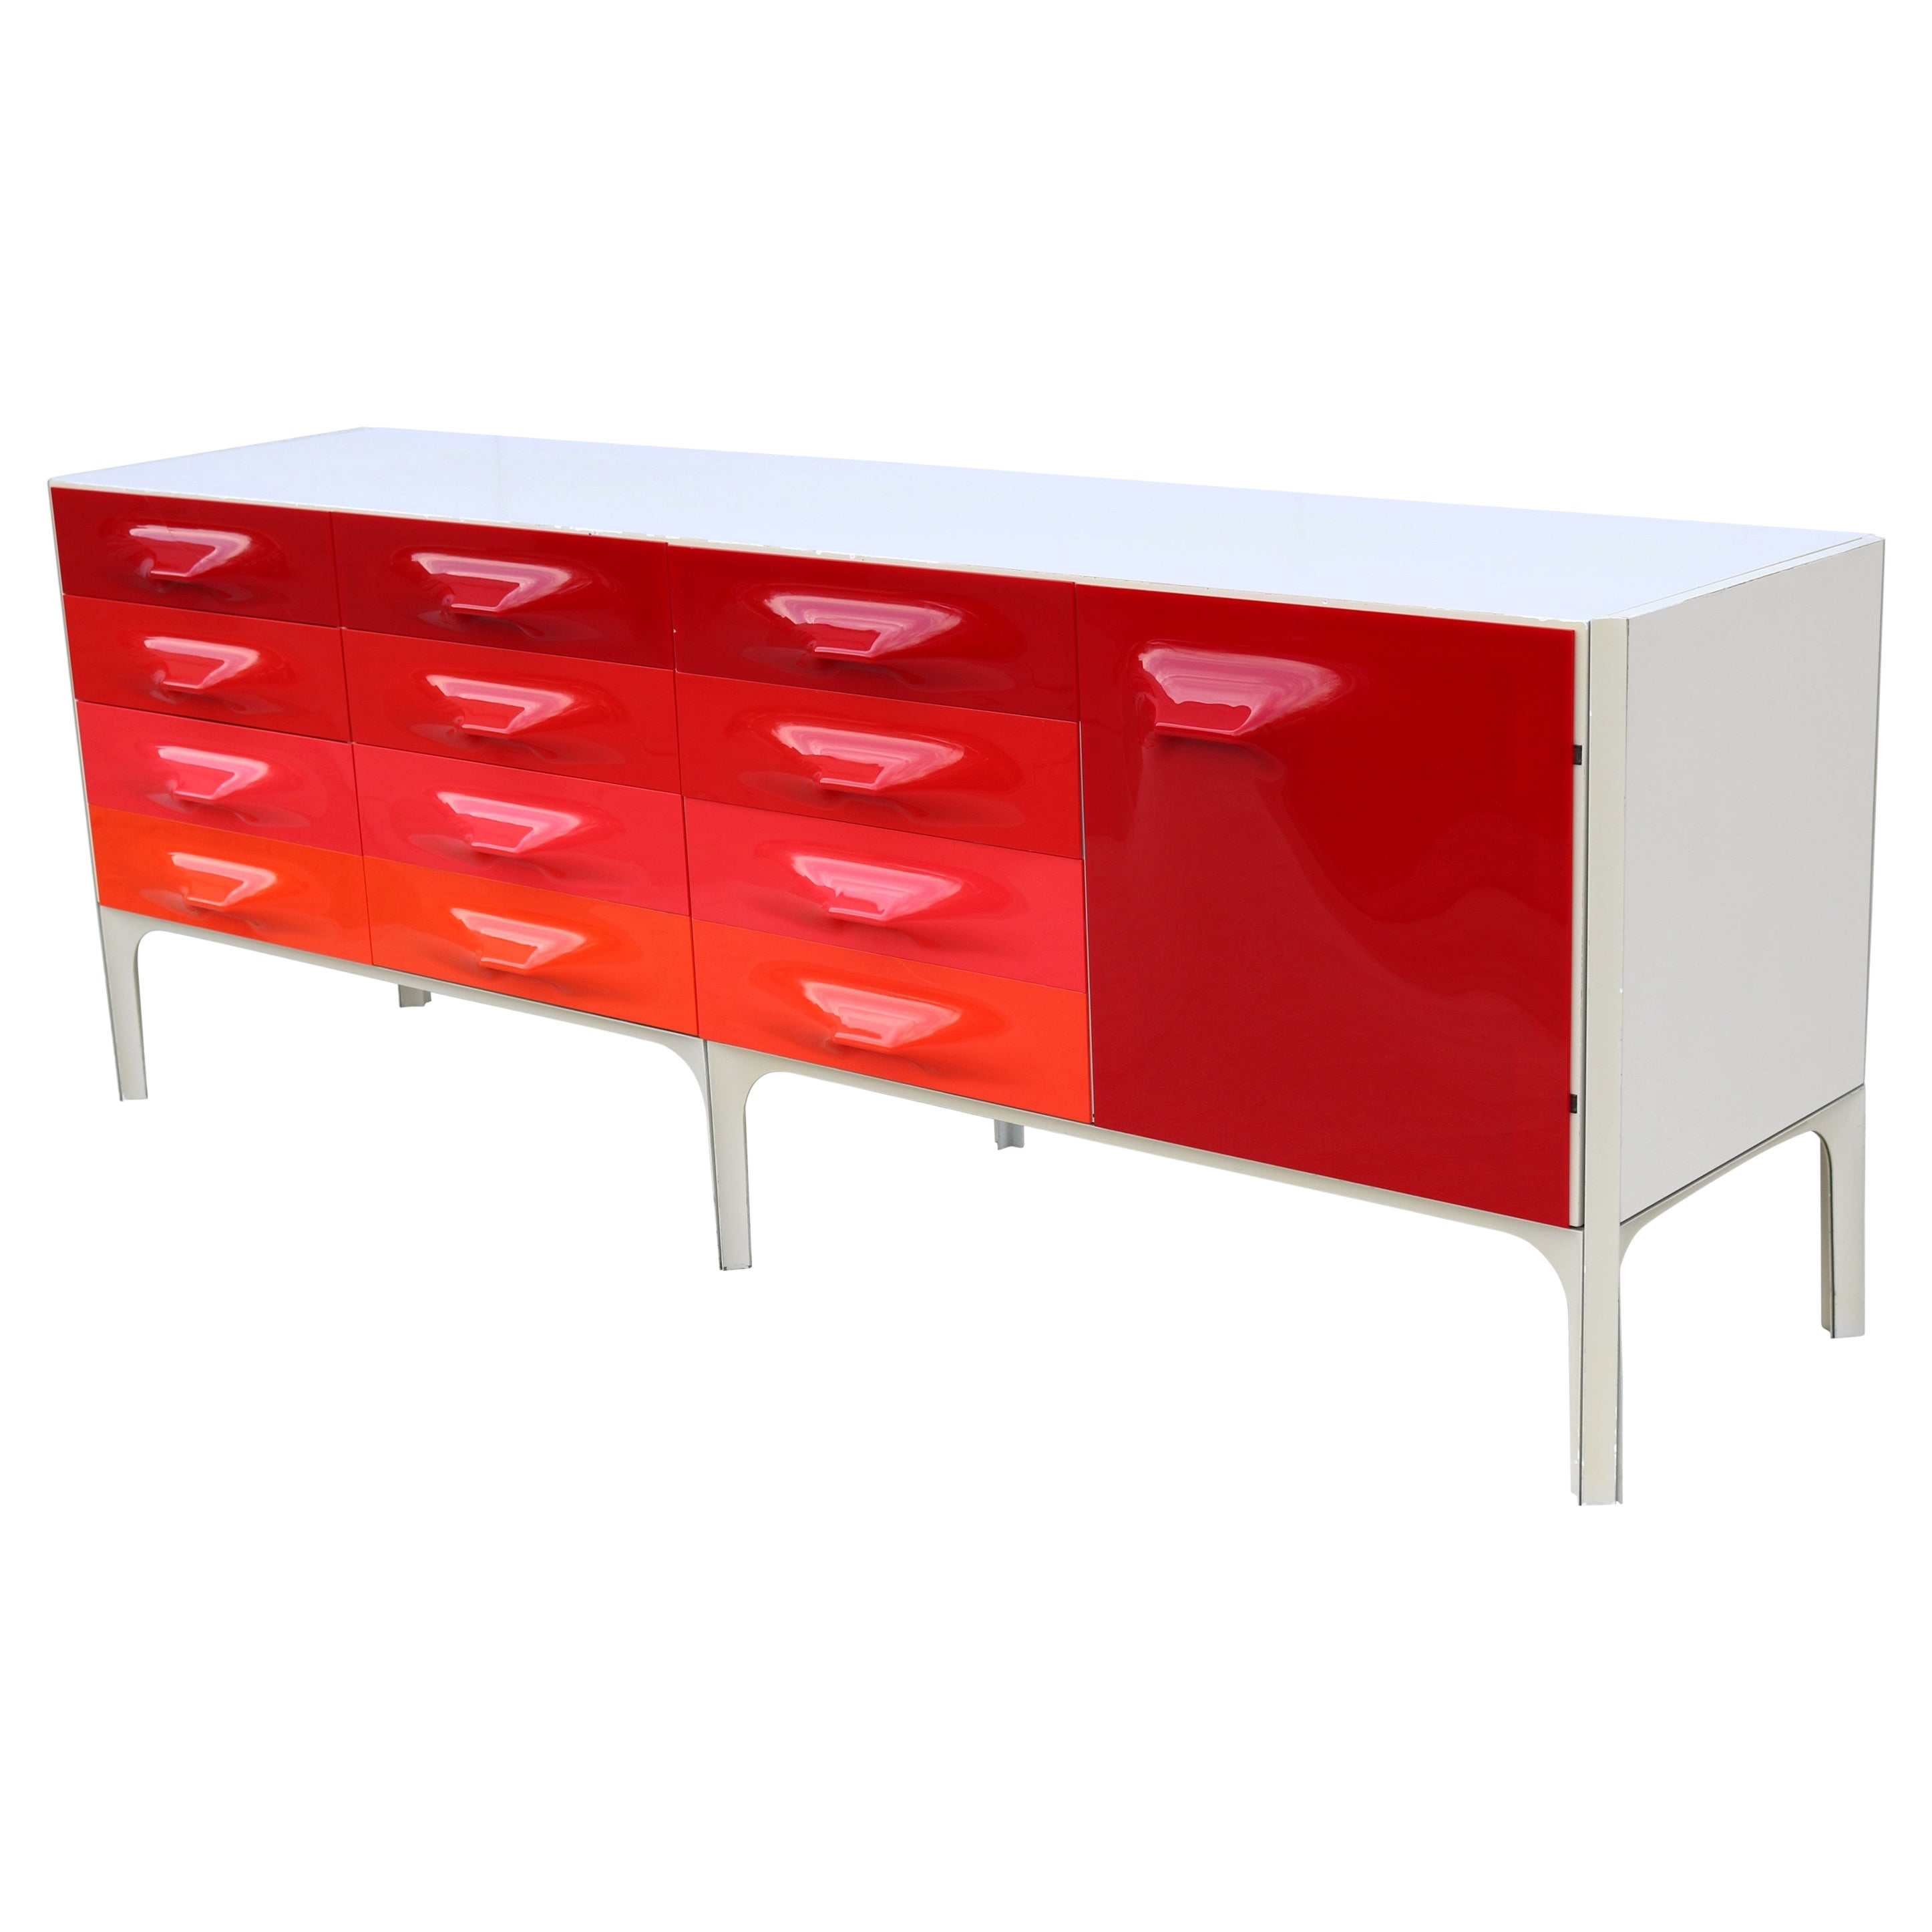 Mid-Century Modern Raymond Loewy DF2000 Credenza or Dresser by Doubinsky Freres For Sale